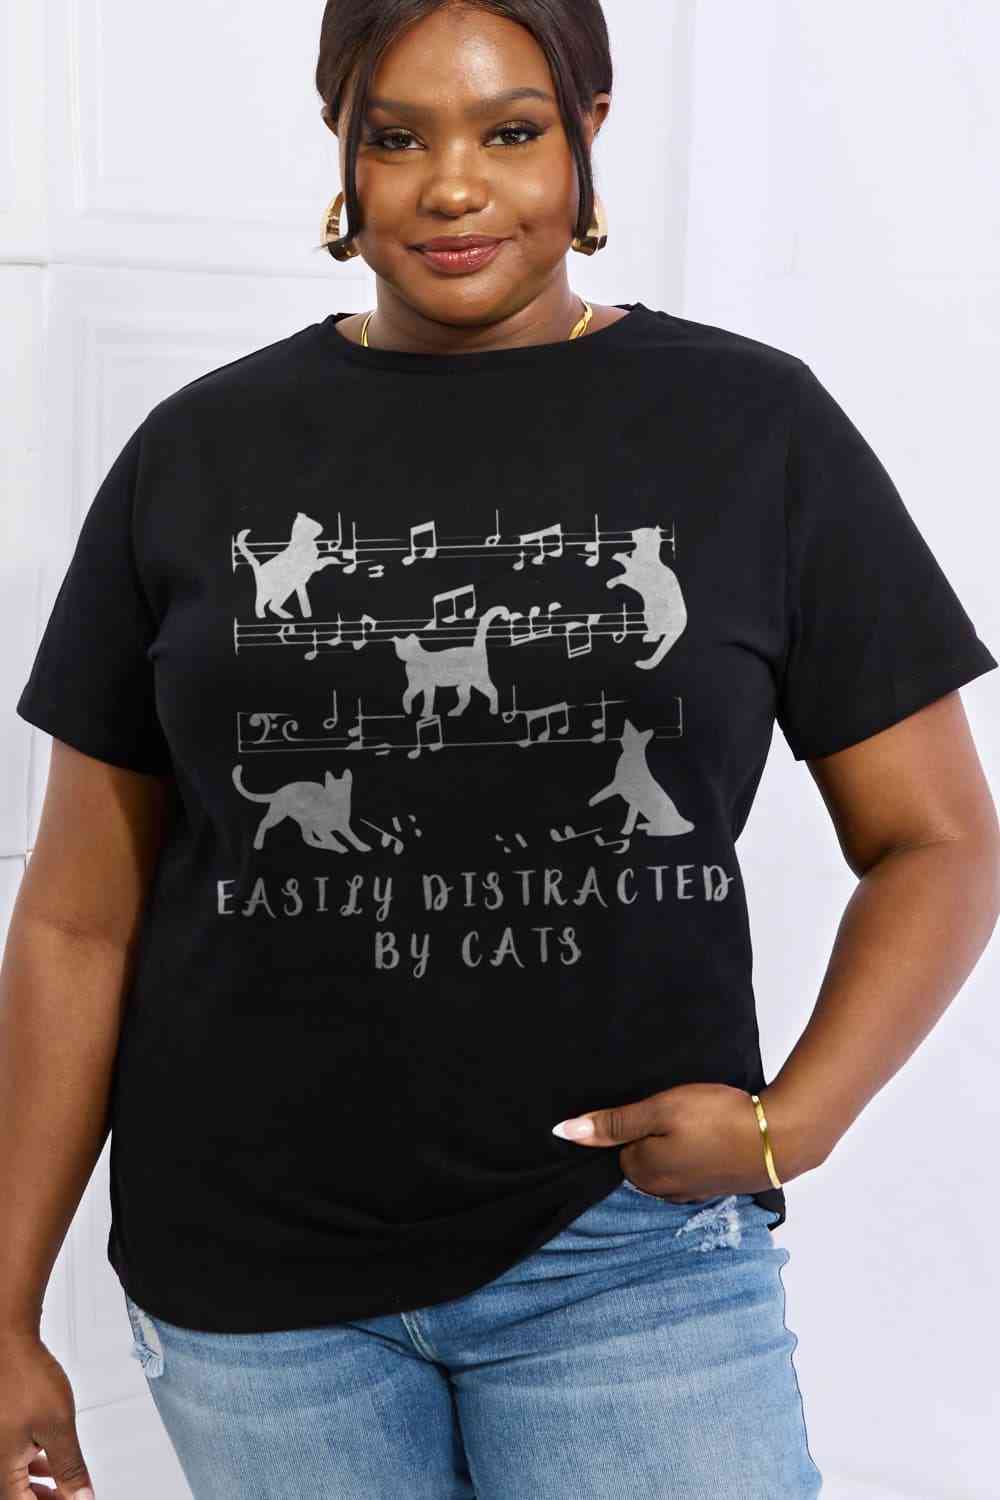 EASILY DISTRACTED BY CATS Graphic Cotton Tee - Black / S - T-Shirts - Shirts & Tops - 7 - 2024